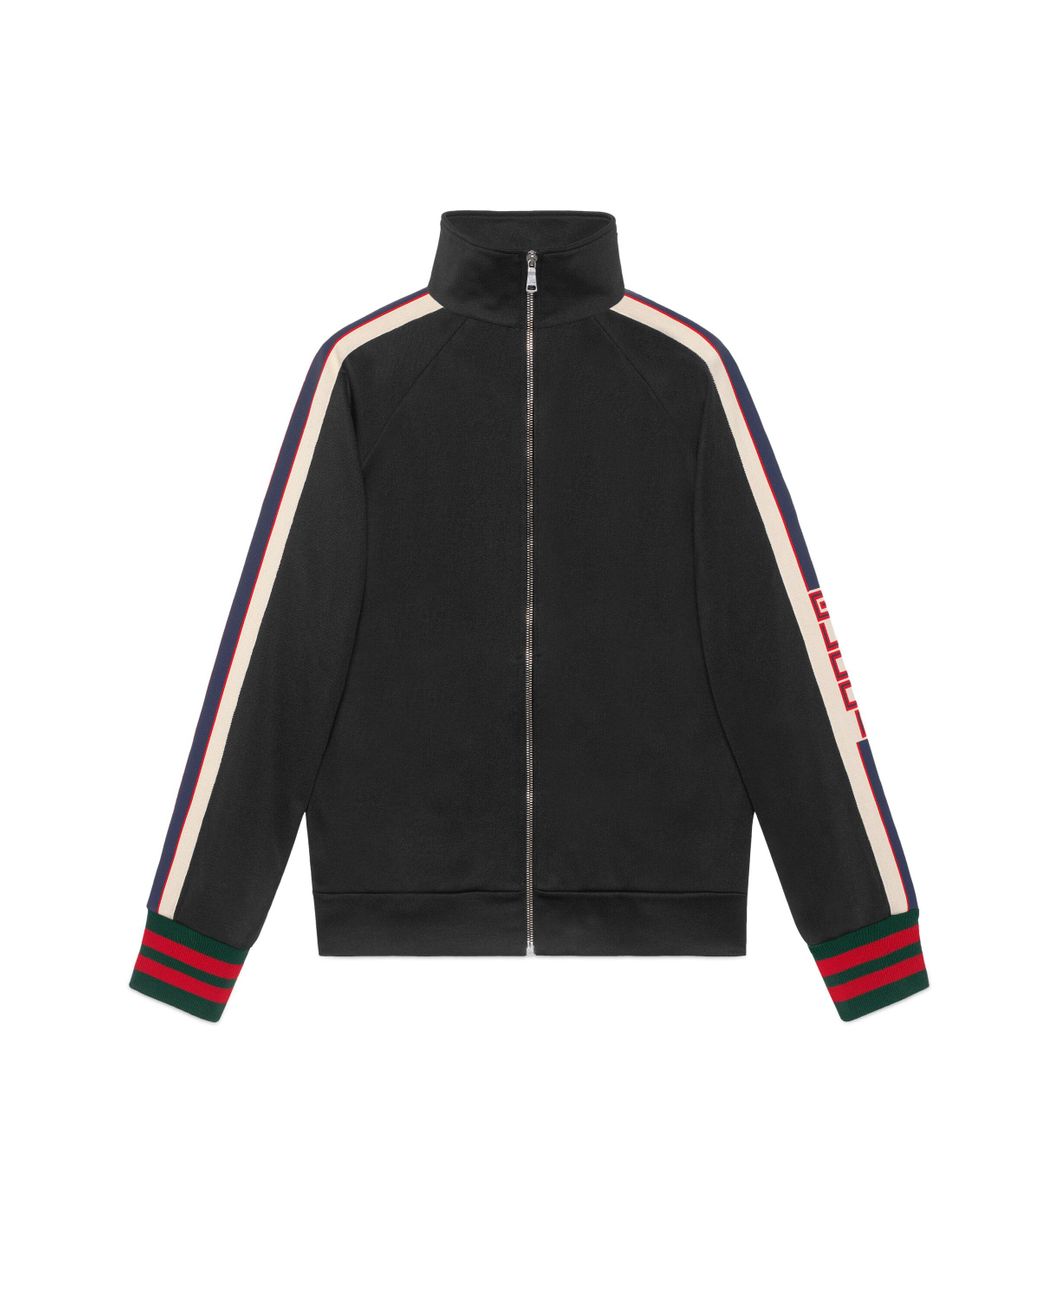 Gucci Synthetic Technical Jersey Jacket in Black for Men - Save 7% - Lyst